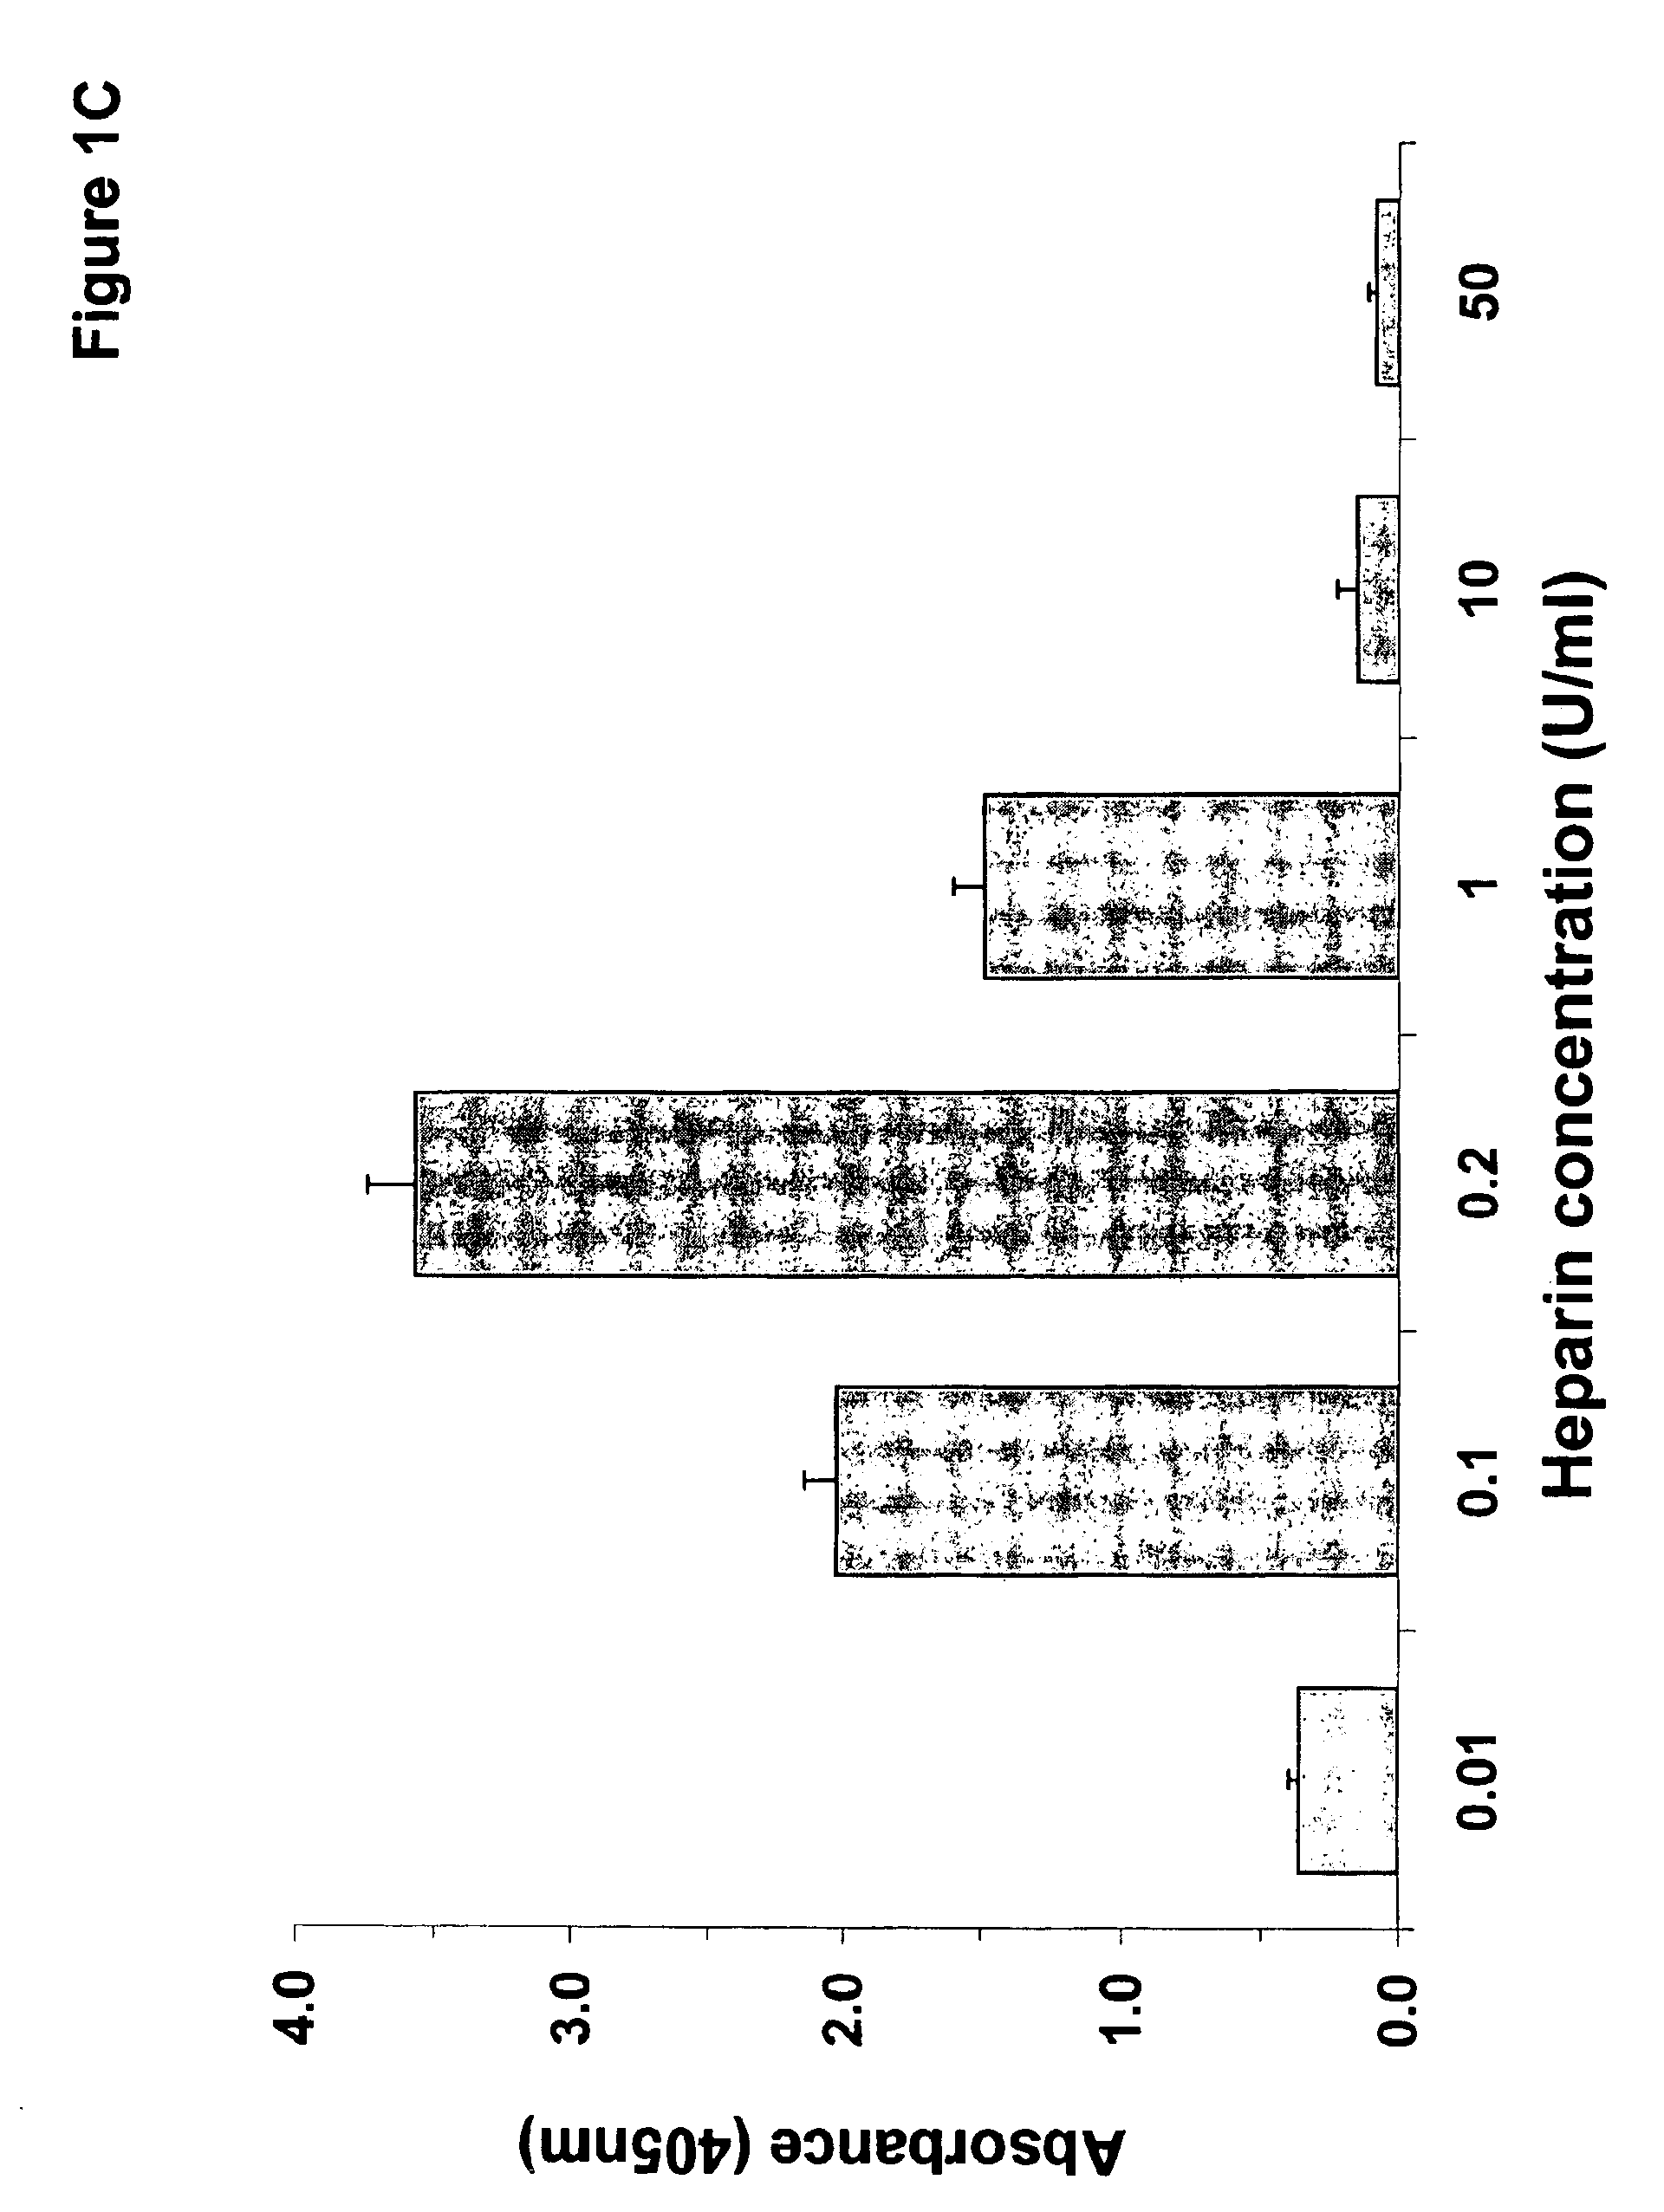 Compositions and methods useful for the diagnosis and treatment of heparin induced thrombocytopenia/thrombosis